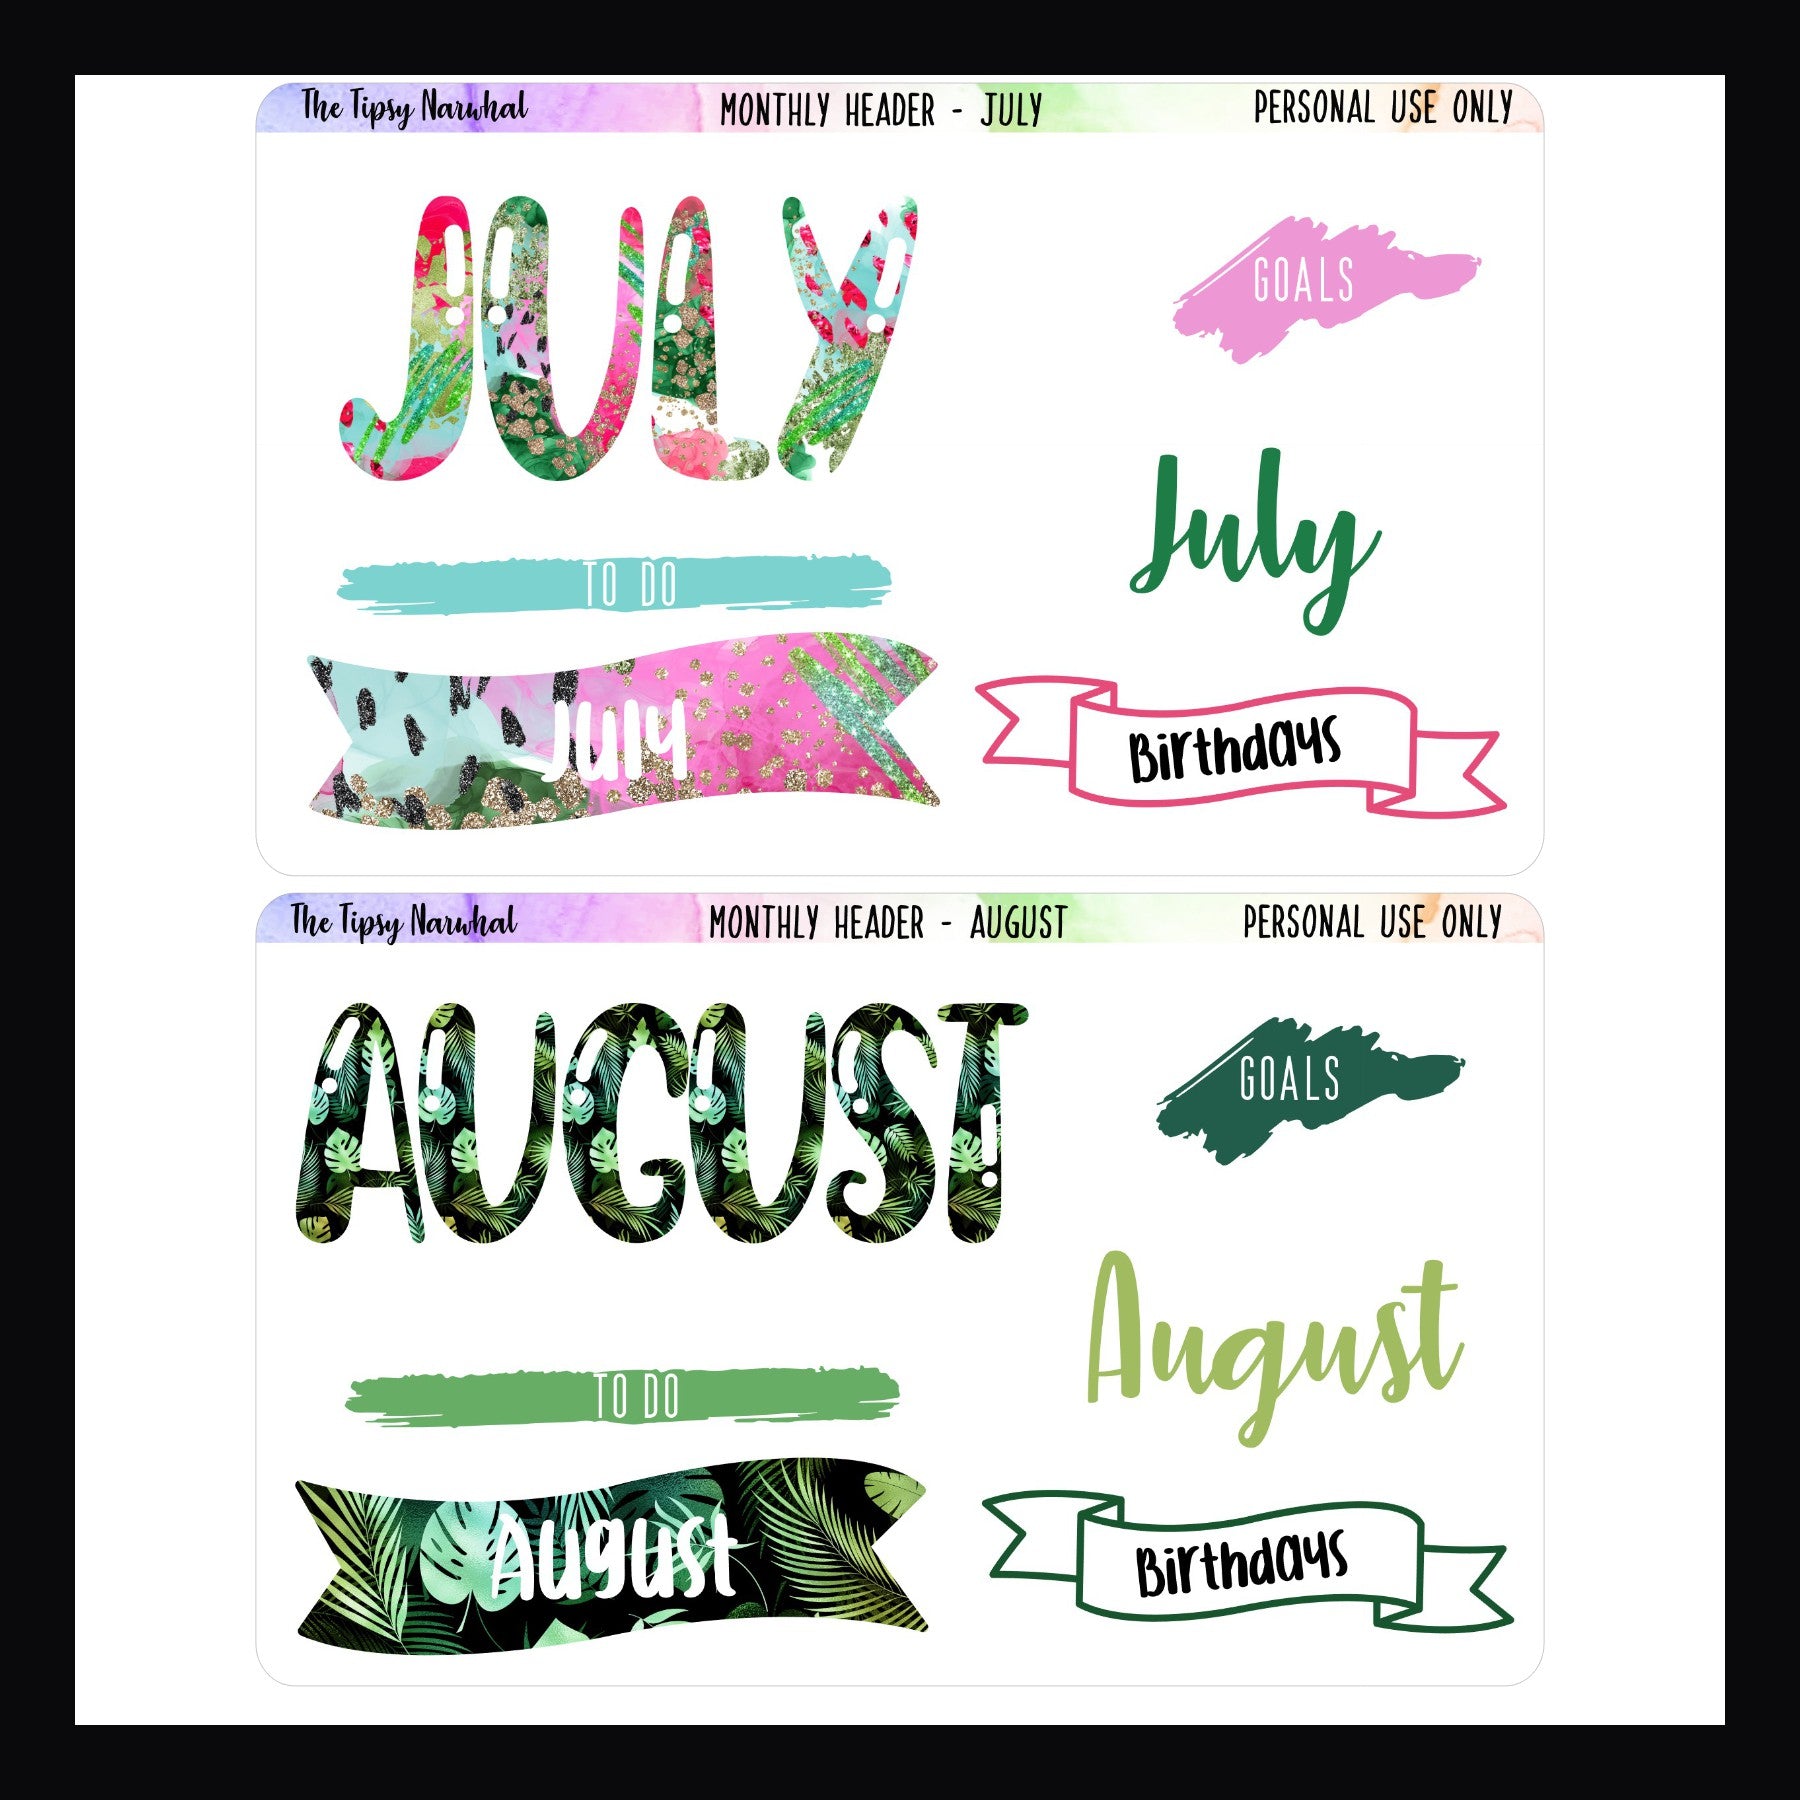 July title sheet, August title sheet, monthly titles, to dos, goals, birthdays, flags, scribbles, bubble letters